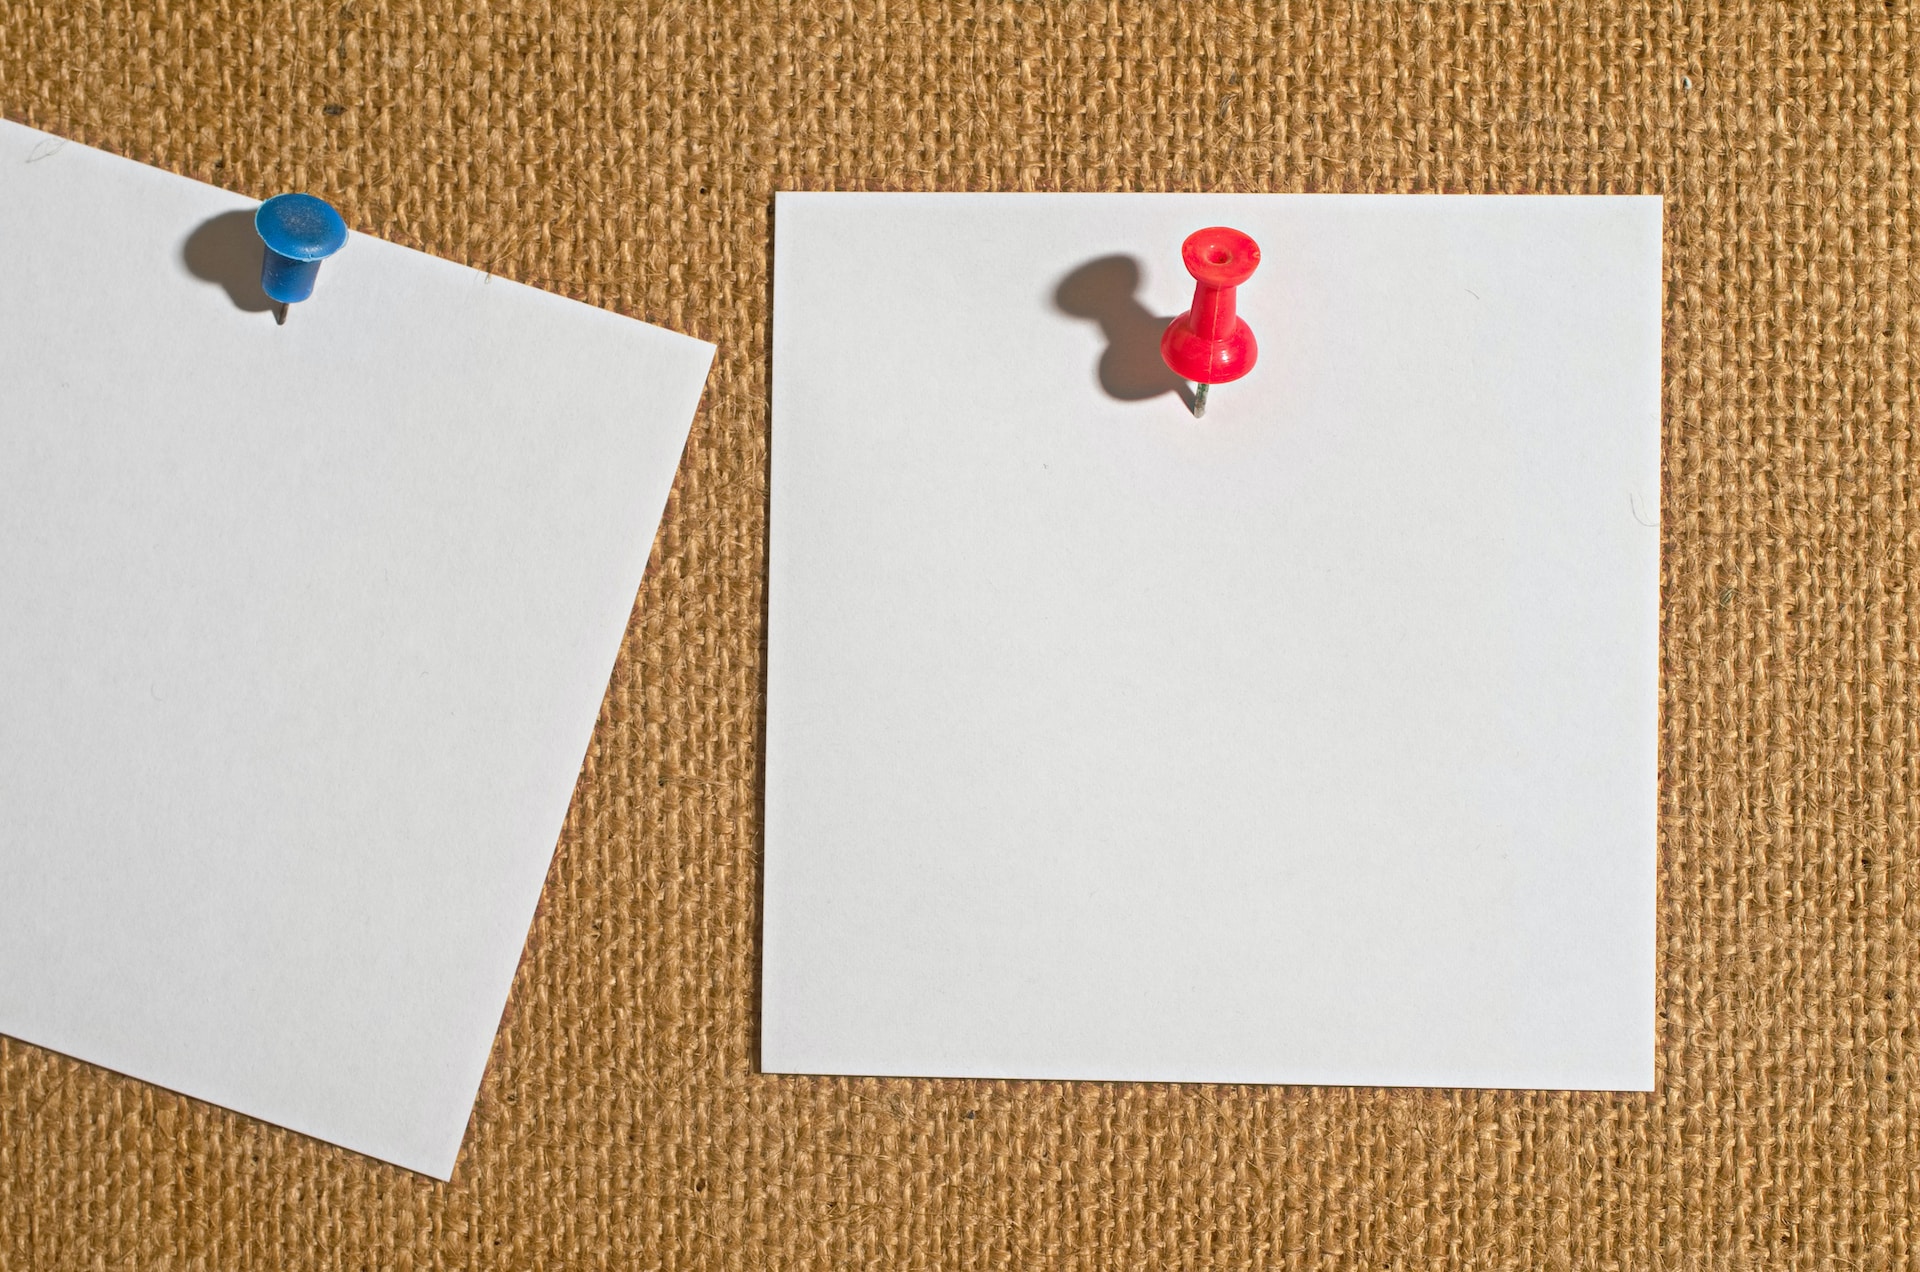 An image showing two pieces of paper pinned to a board